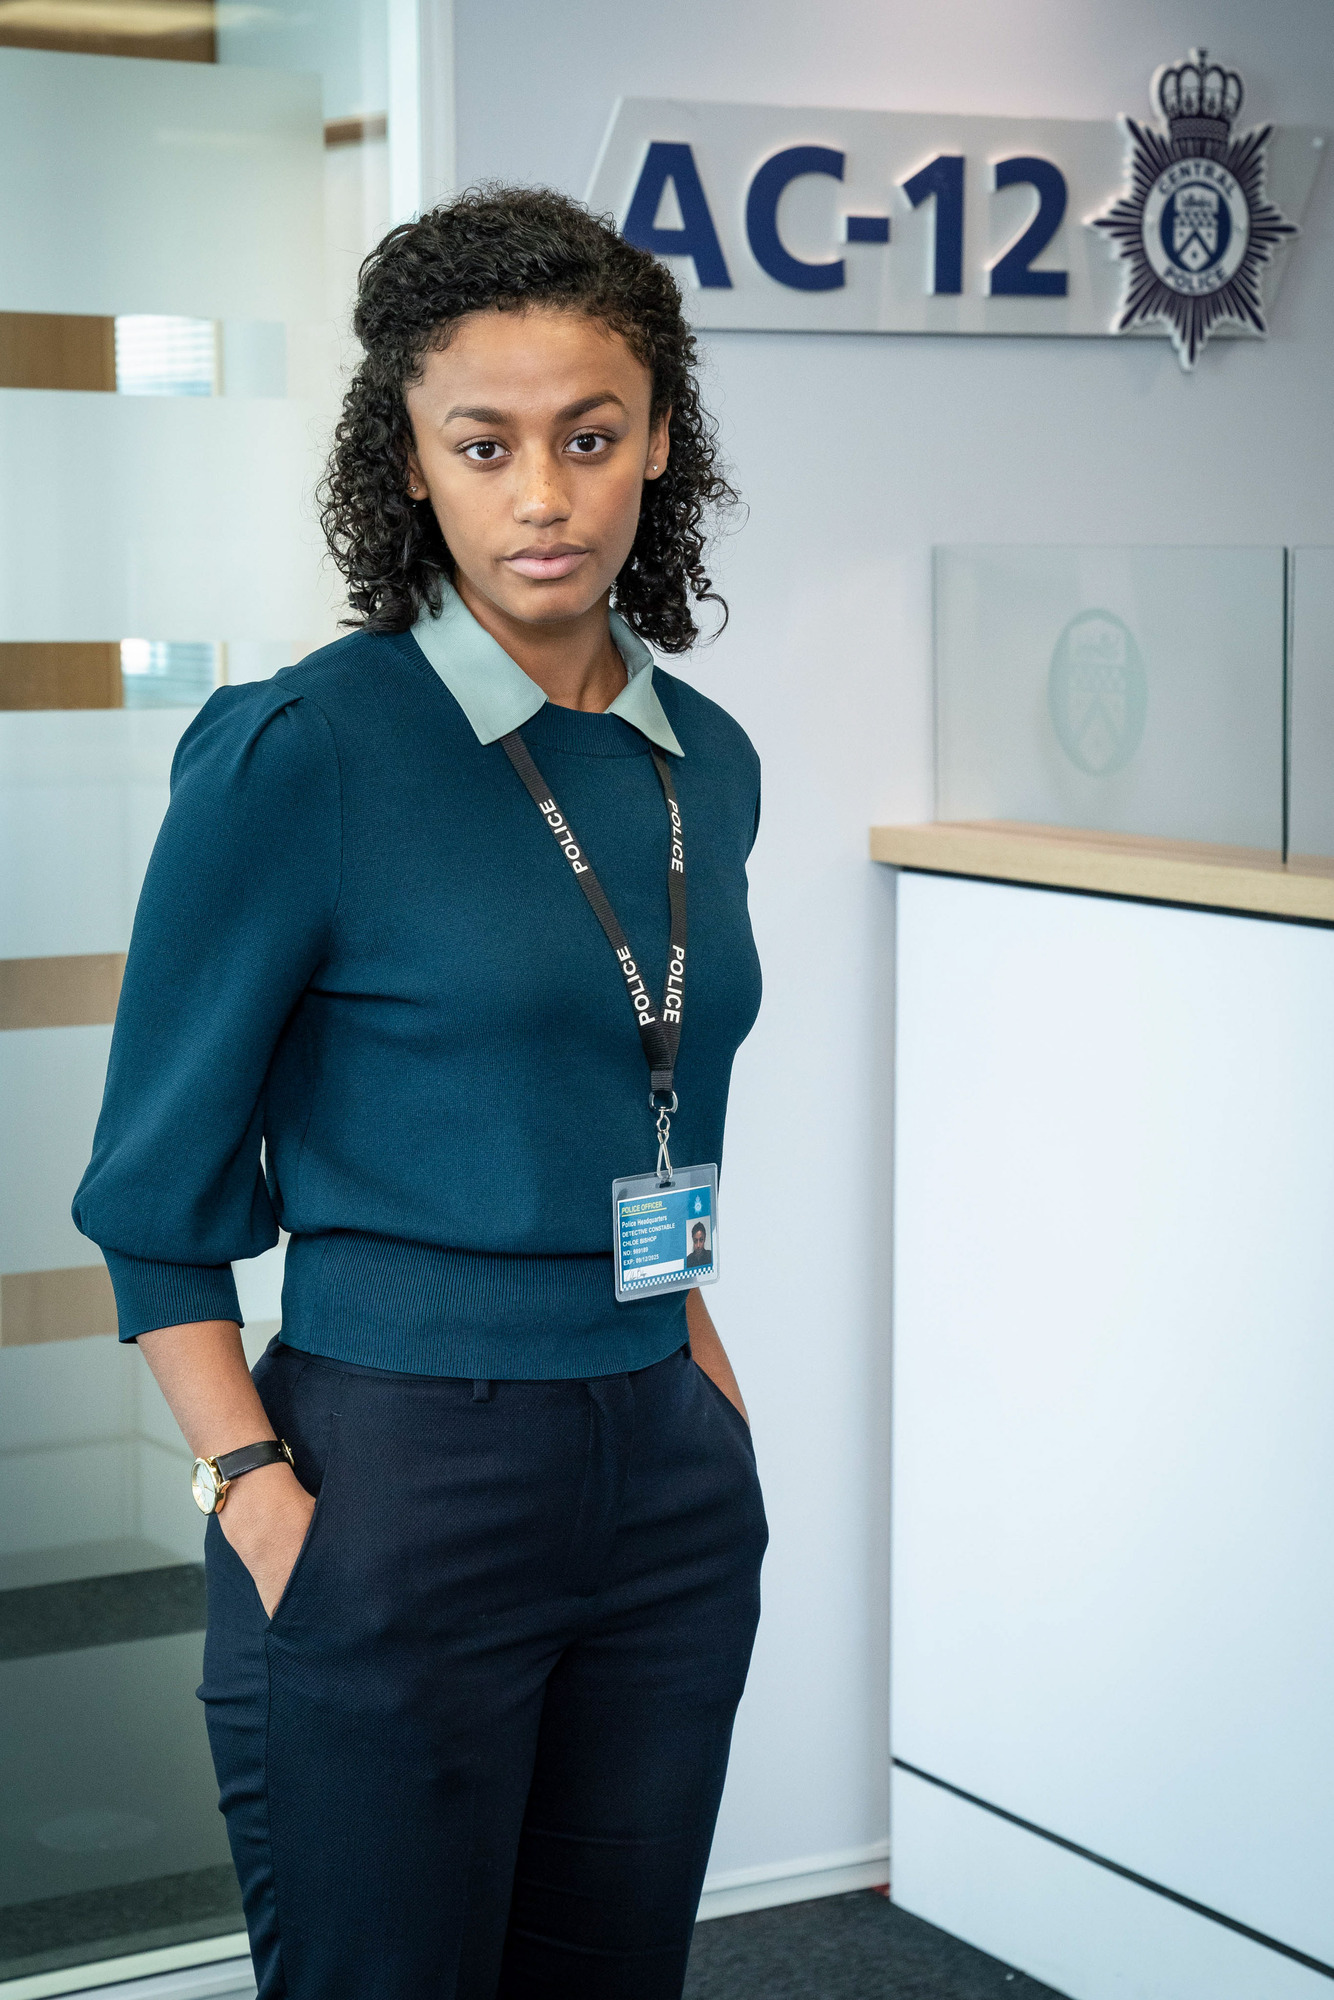 Shalom Brune-Franklin’s Line Of Duty Audition Was So Secret She Had No Idea...